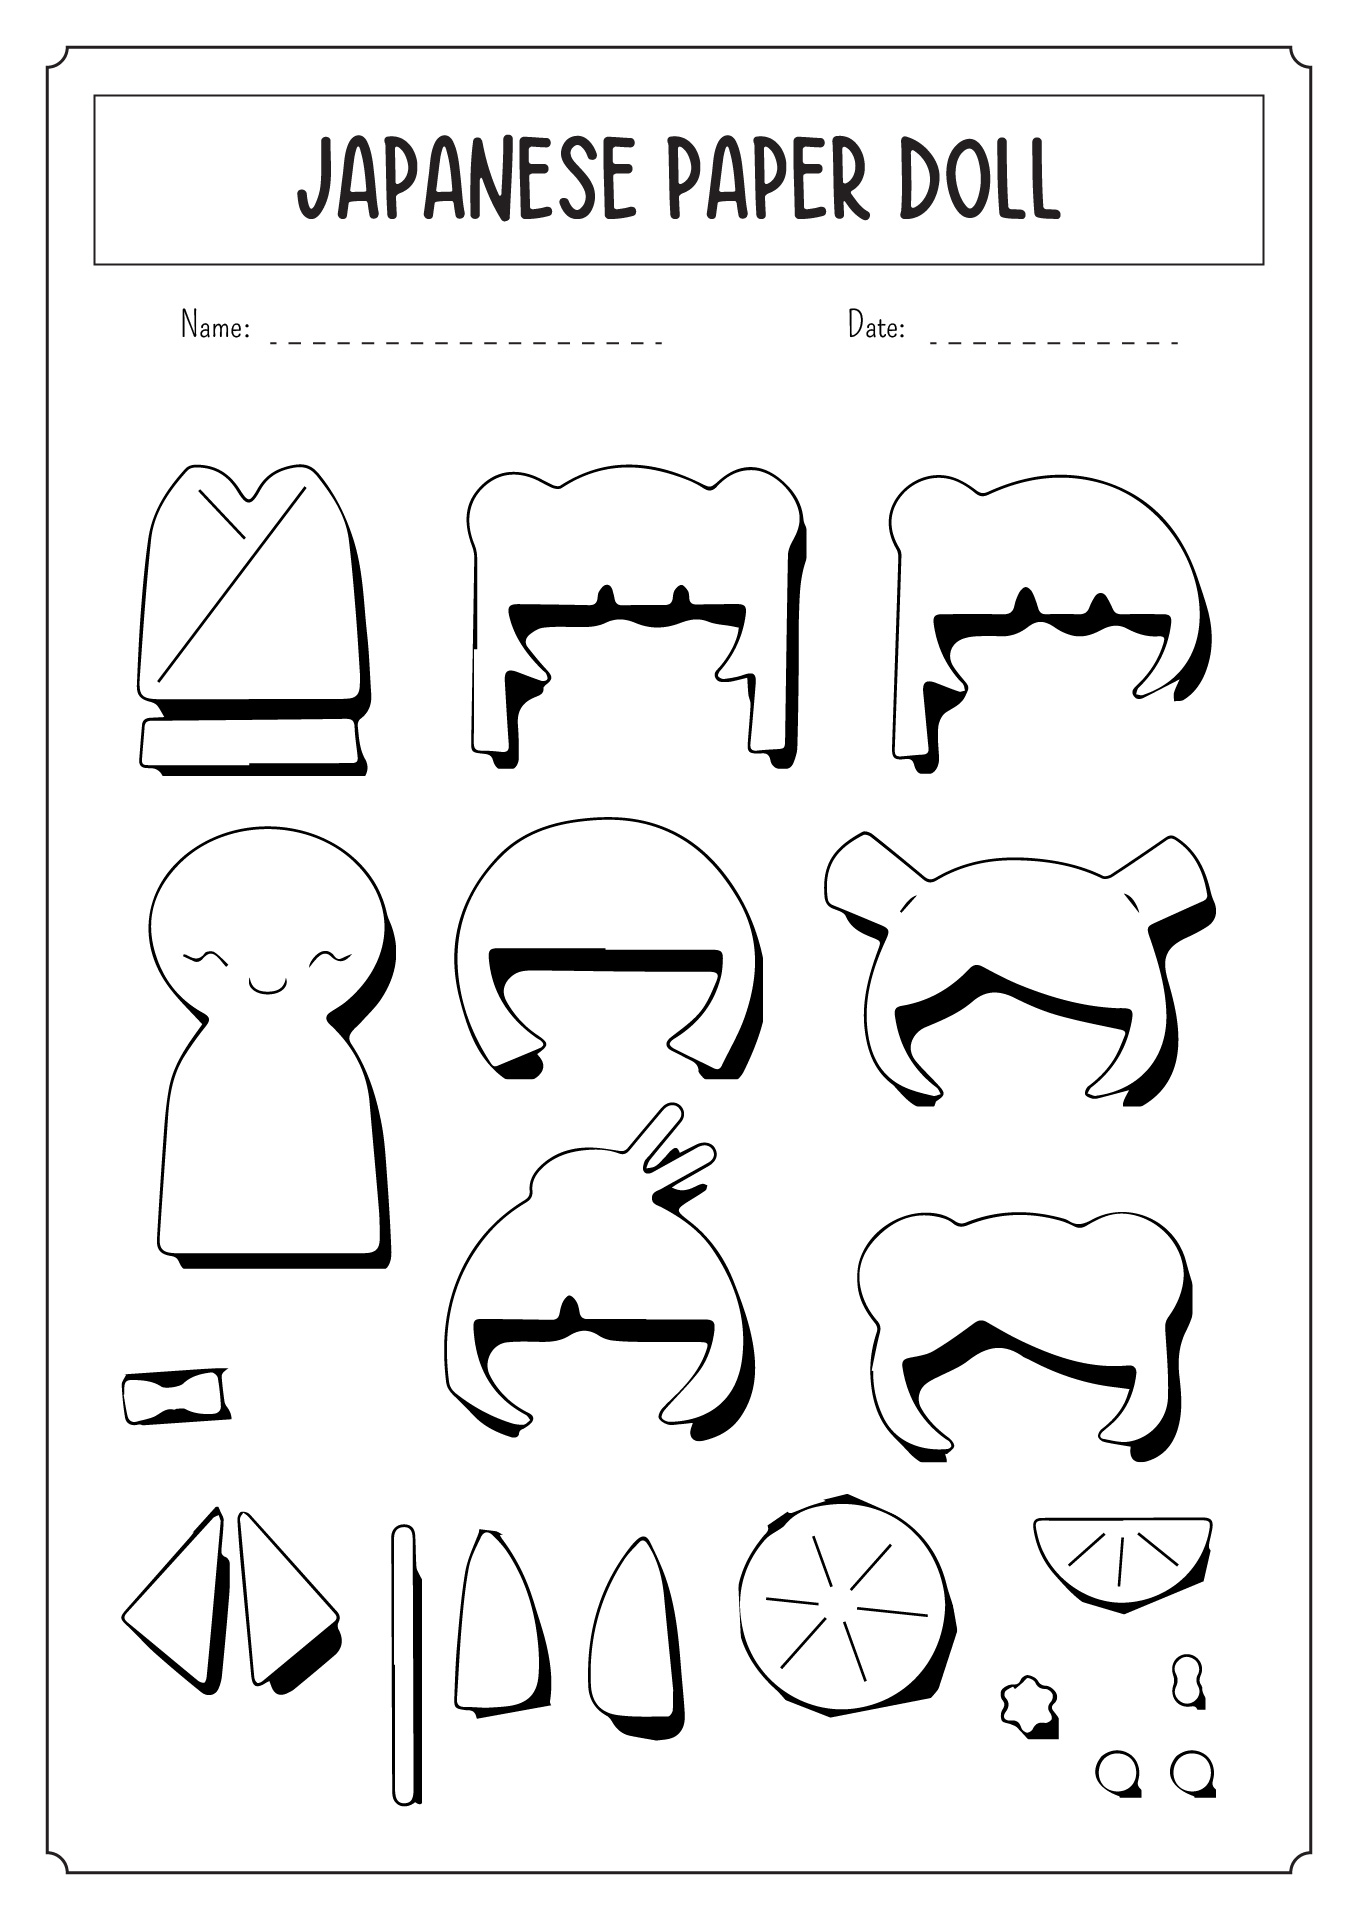 Printable Japanese Paper Doll Template Image